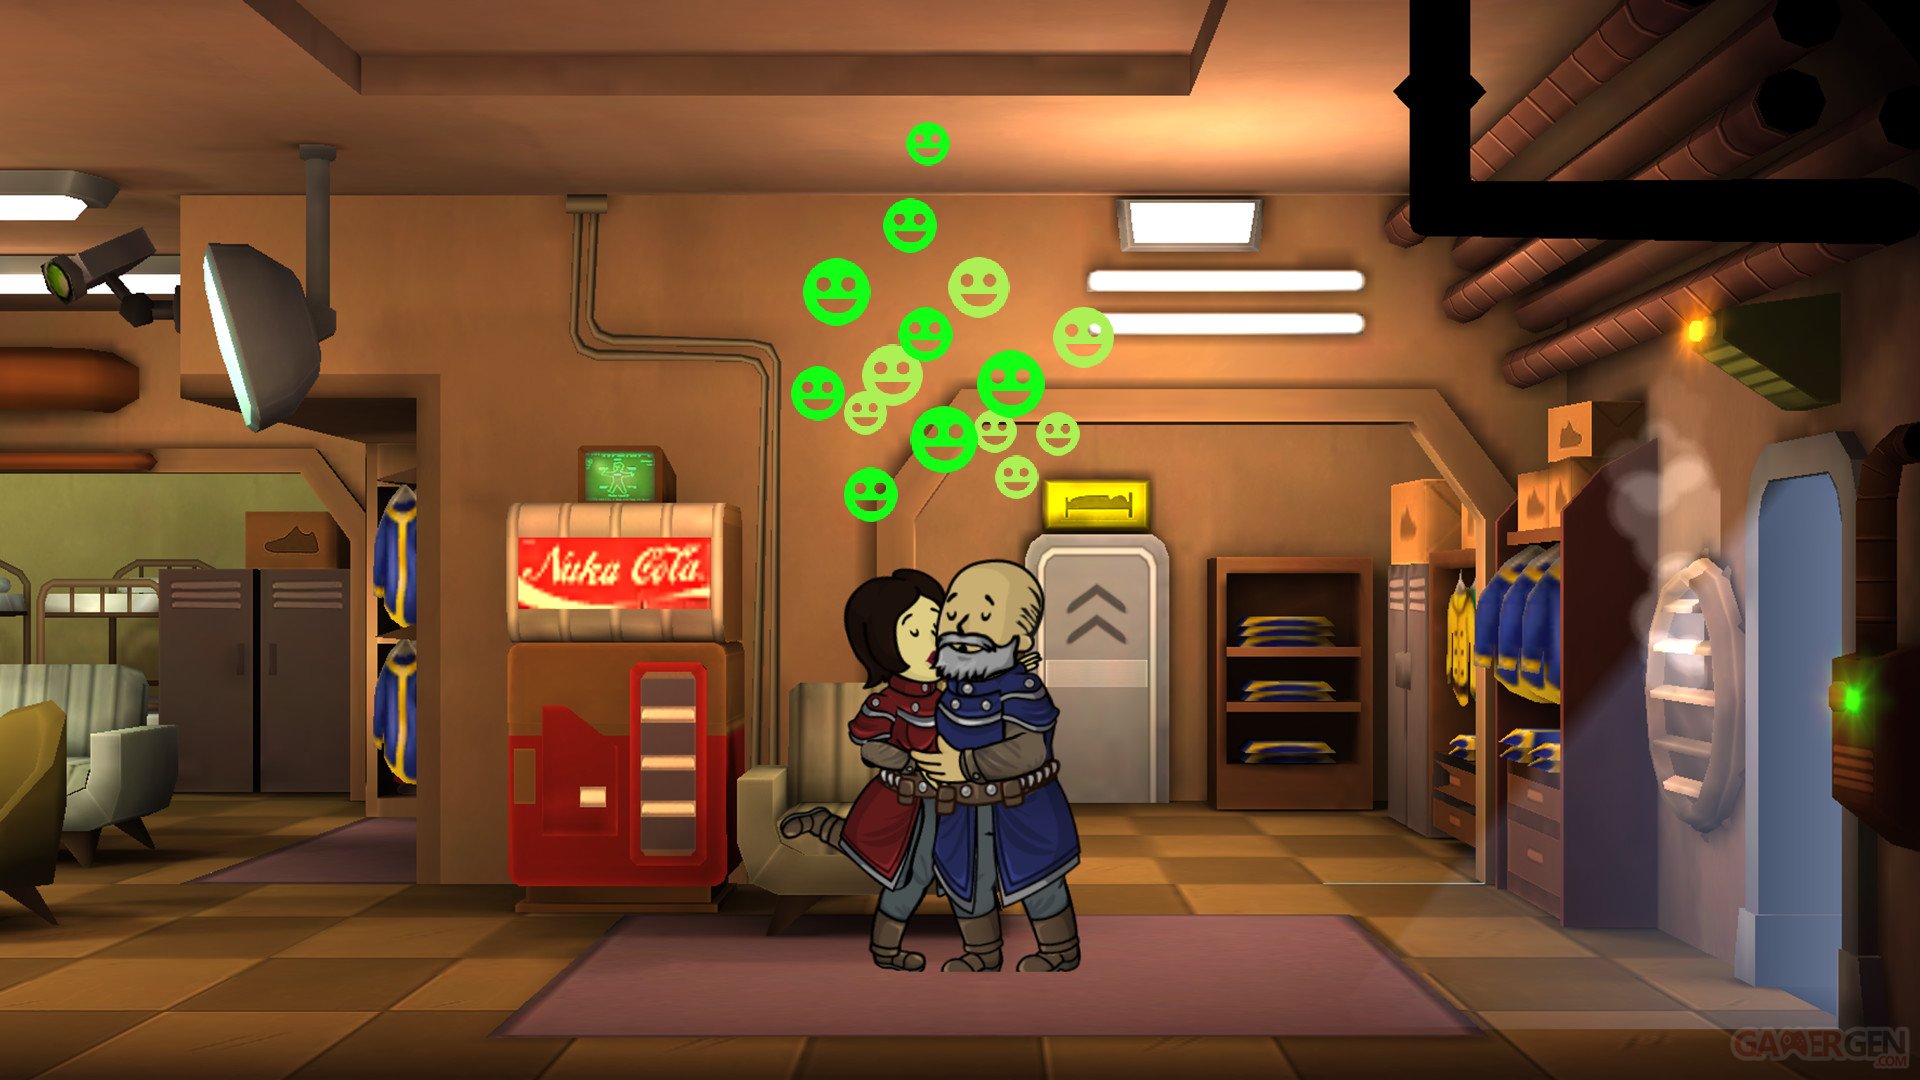 fallout shelter save editor ps4